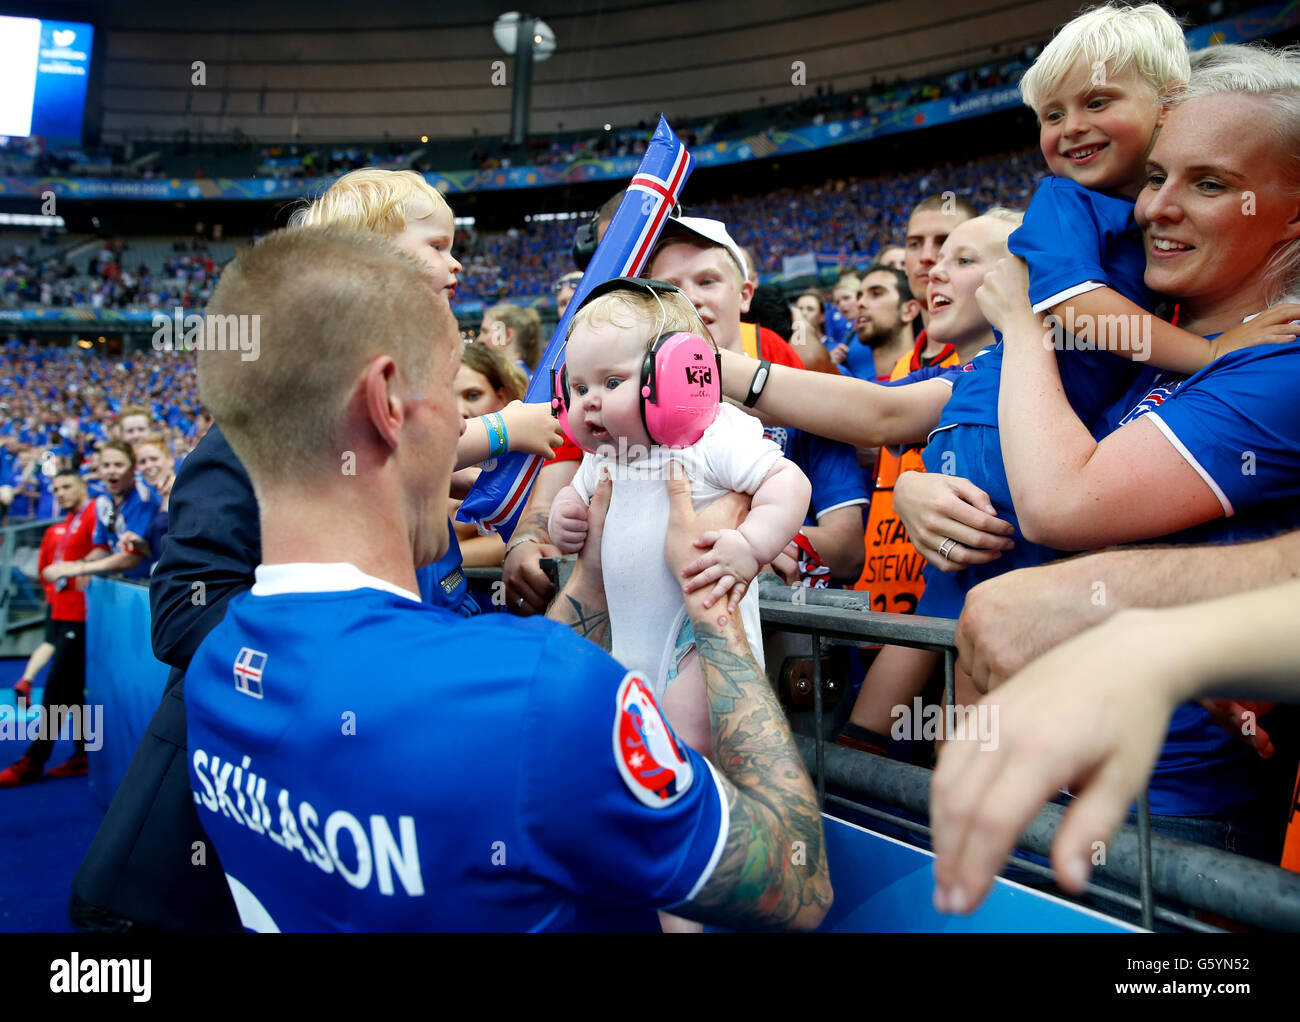 Iceland's Ari Freyr Skulason holds a baby from the crowd ...